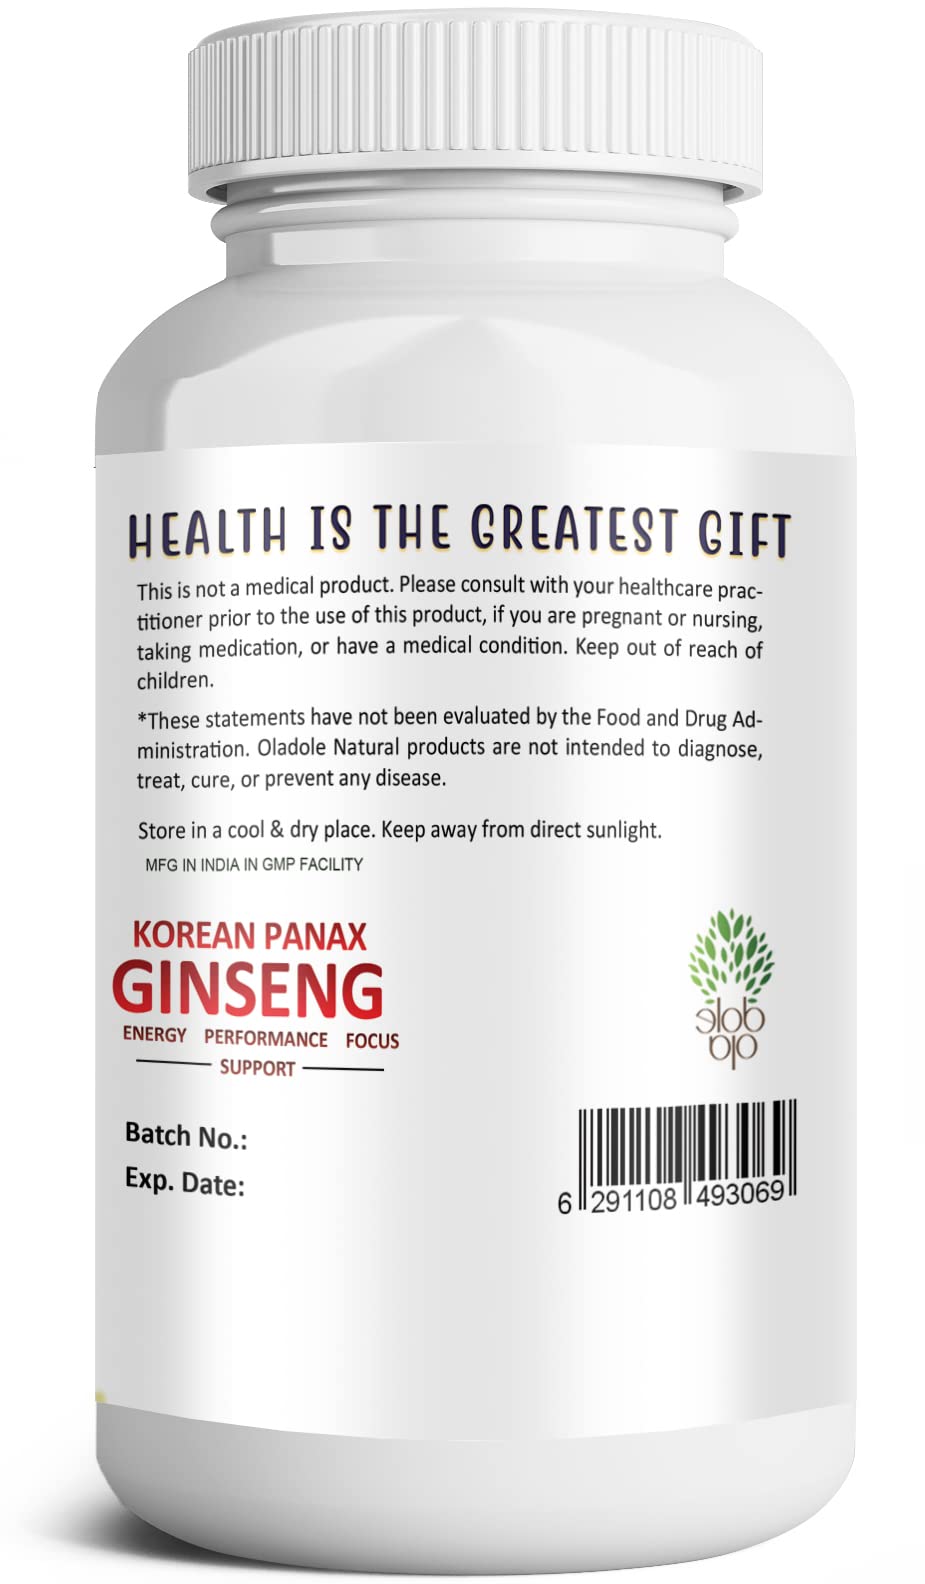 Oladole Naturals Korean Panax Ginseng- 120 Vegan Capsule | Supports Energy, Performance, Focus, Extra Strength, Potency, Improve Blood Flow With High Ginsenosides | For Mem & Women